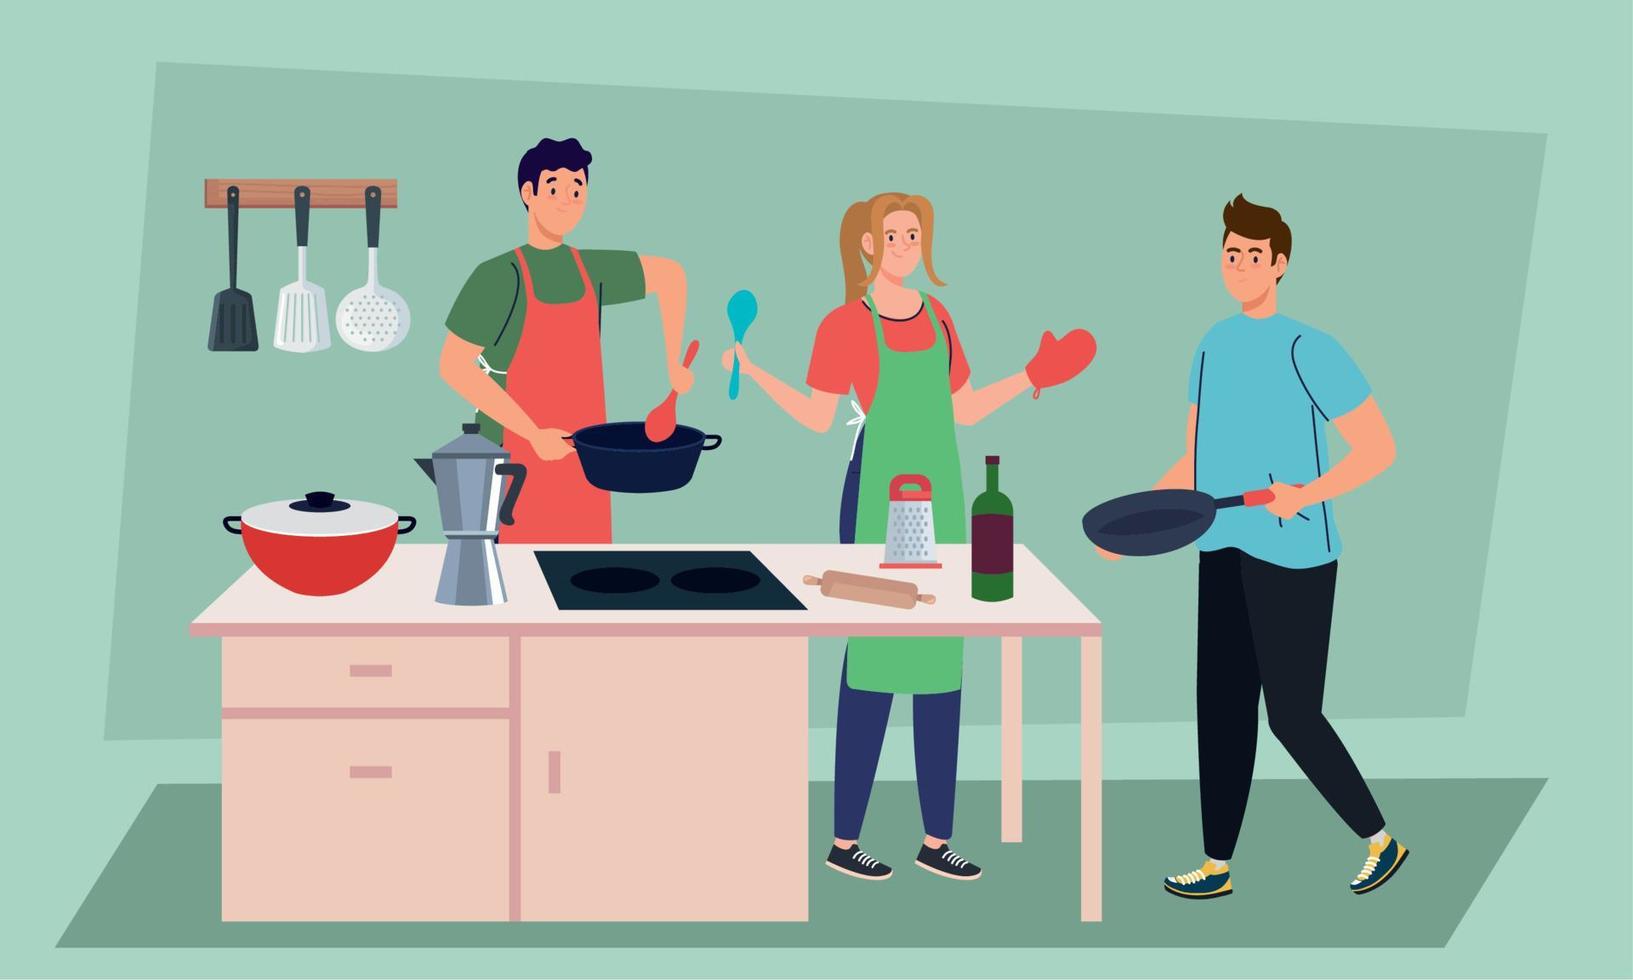 group of people cooking vector